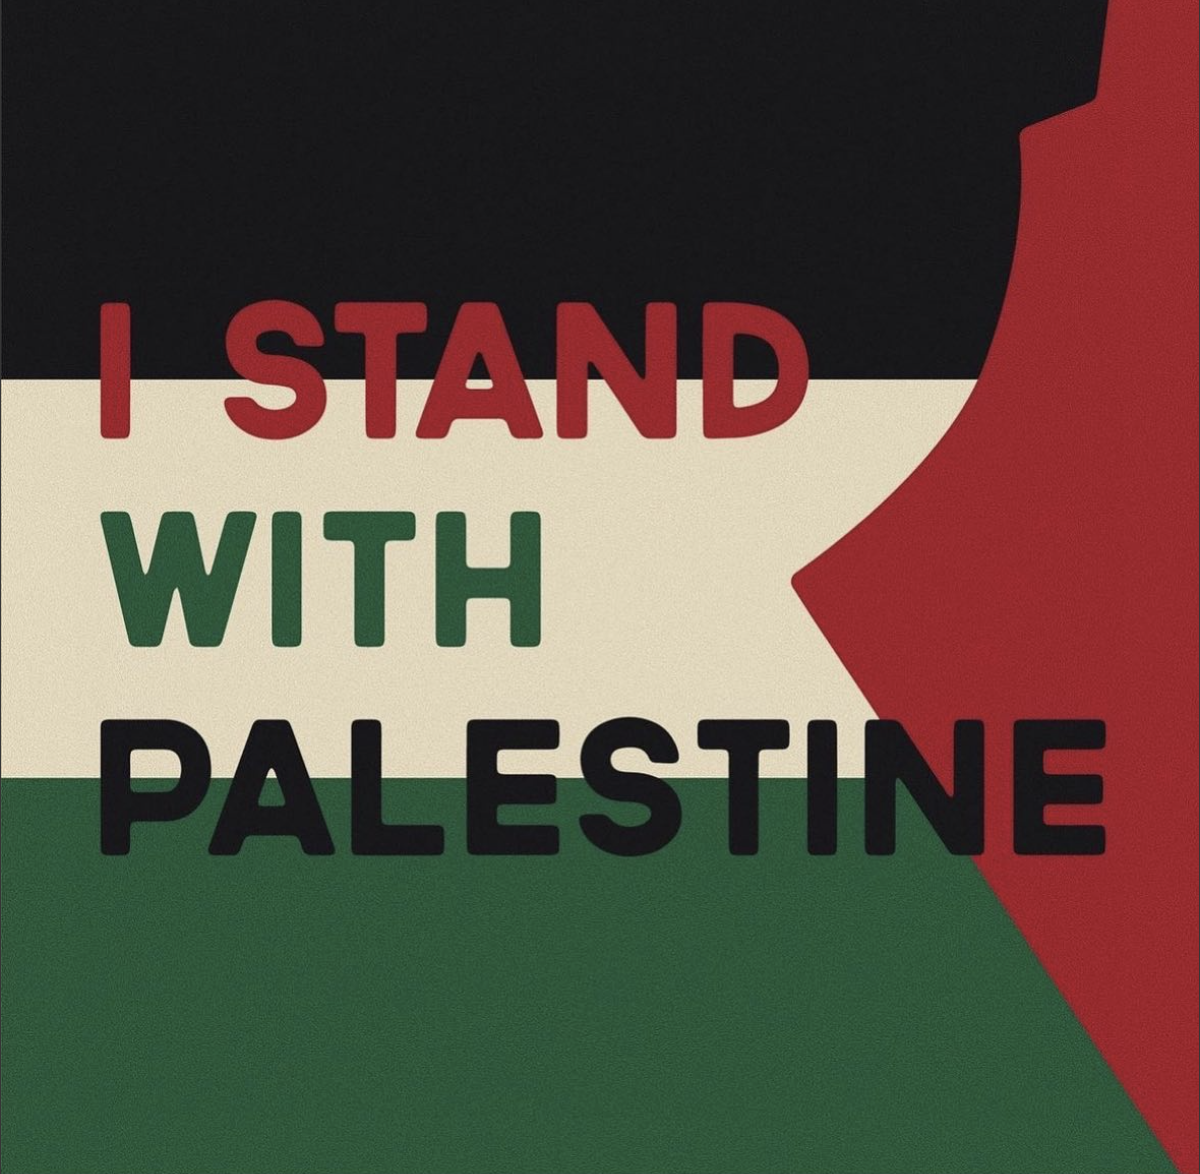 I Stand with Palestine design banner